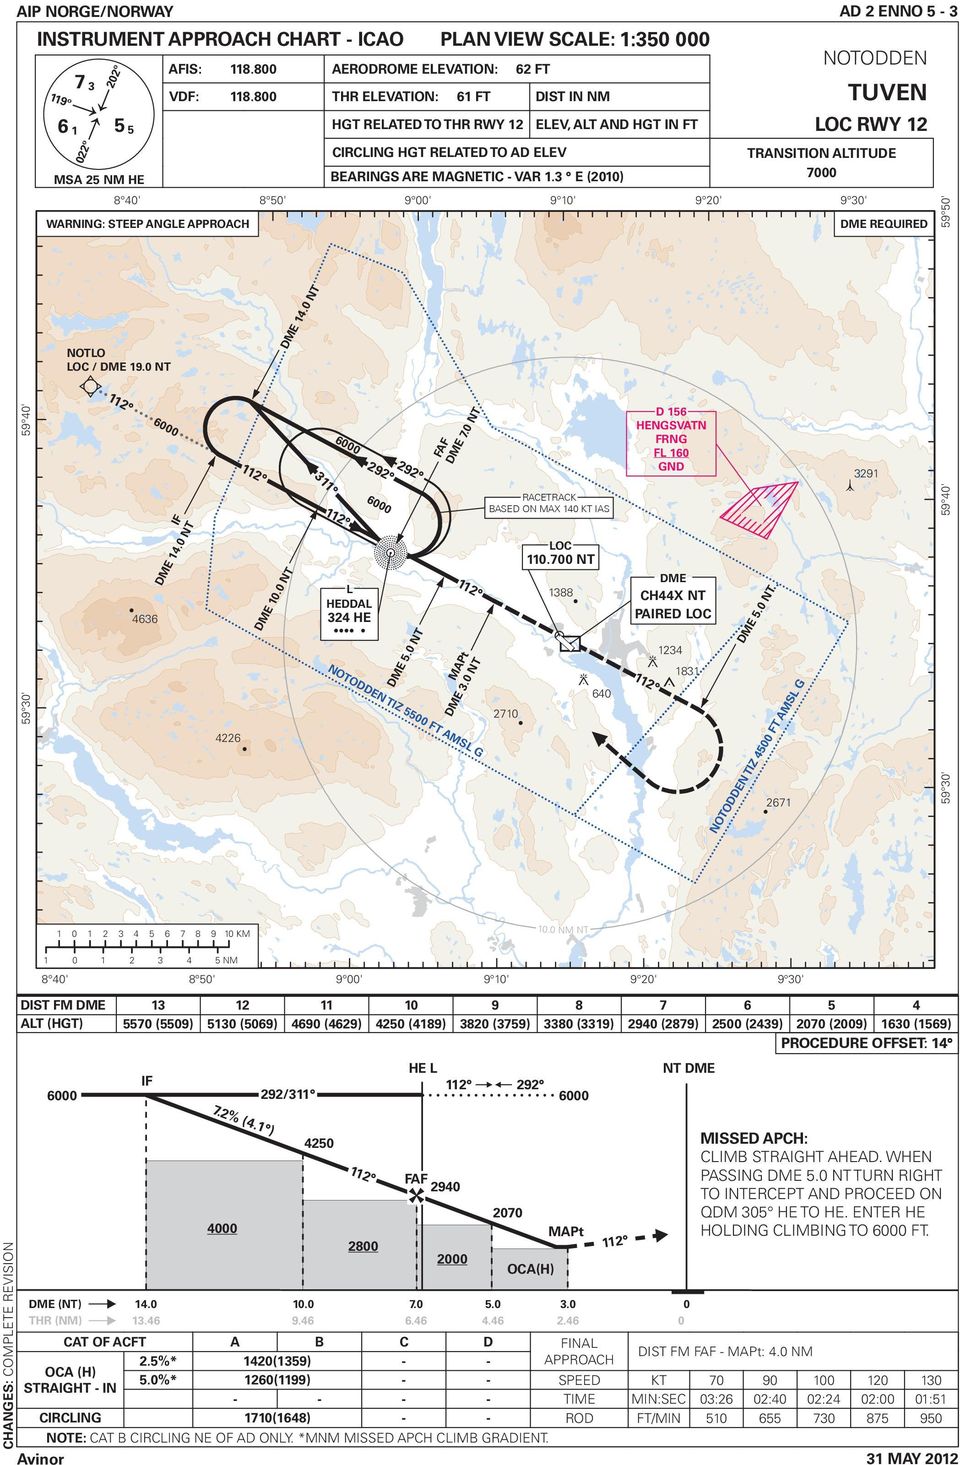 3 E (2010) 9 00' PLAN VIEW SCALE: 1:350 000 9 10' 9 20' NOTODDEN TUVEN LOC RWY 12 TRANSITION ALTITUDE 7000 9 30' DME REQUIRED 59 50' NOTLO LOC / DME 19.0 NT DME 14.